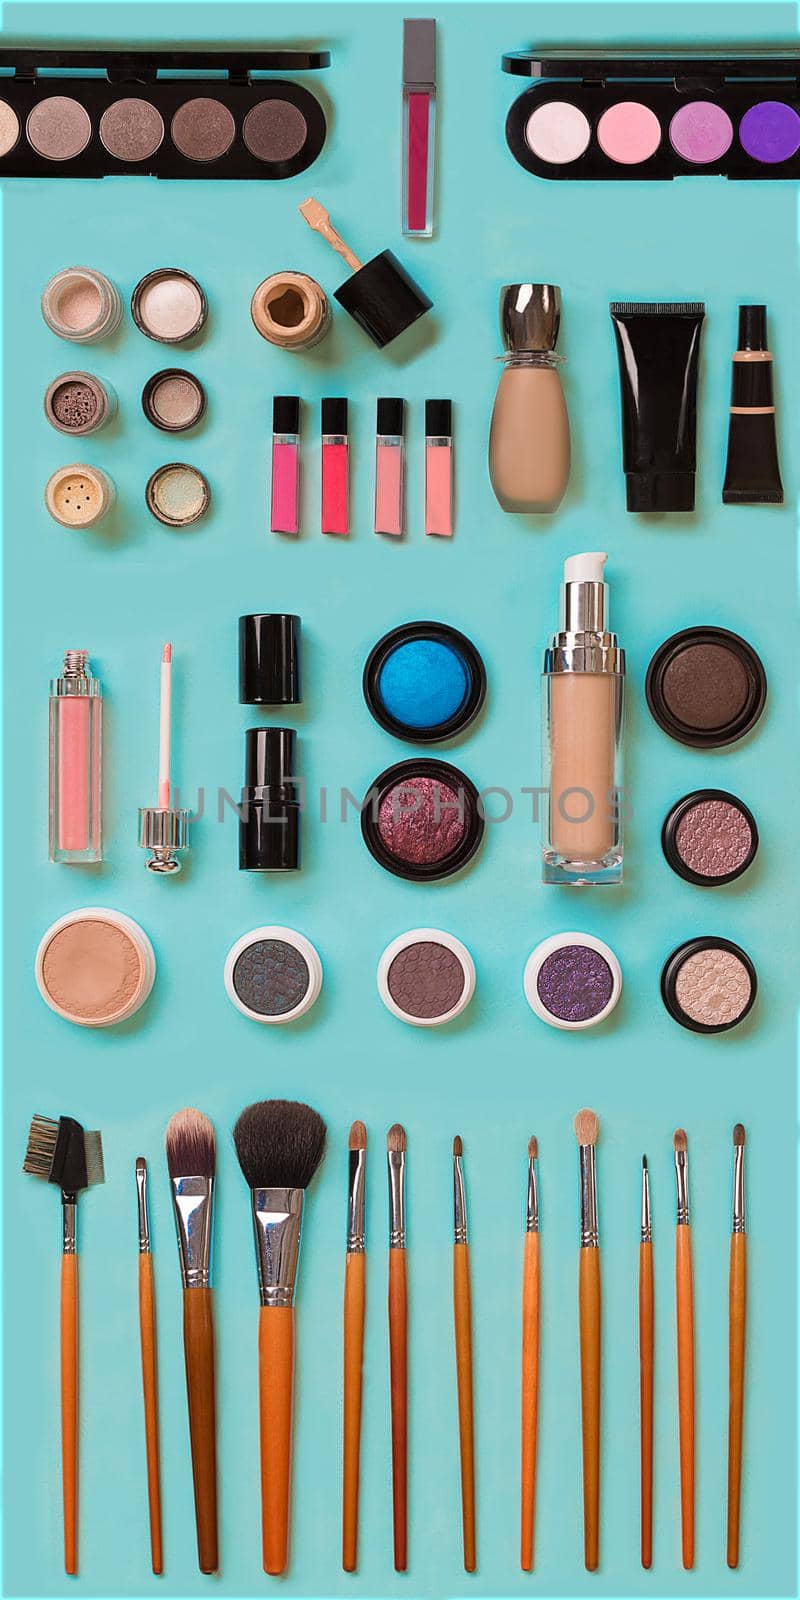 cosmetics for facial makeup: brushes, powder, lipstick, eye shadow, trimmer and other accessories on blue background top view. Beauty flat lay concept